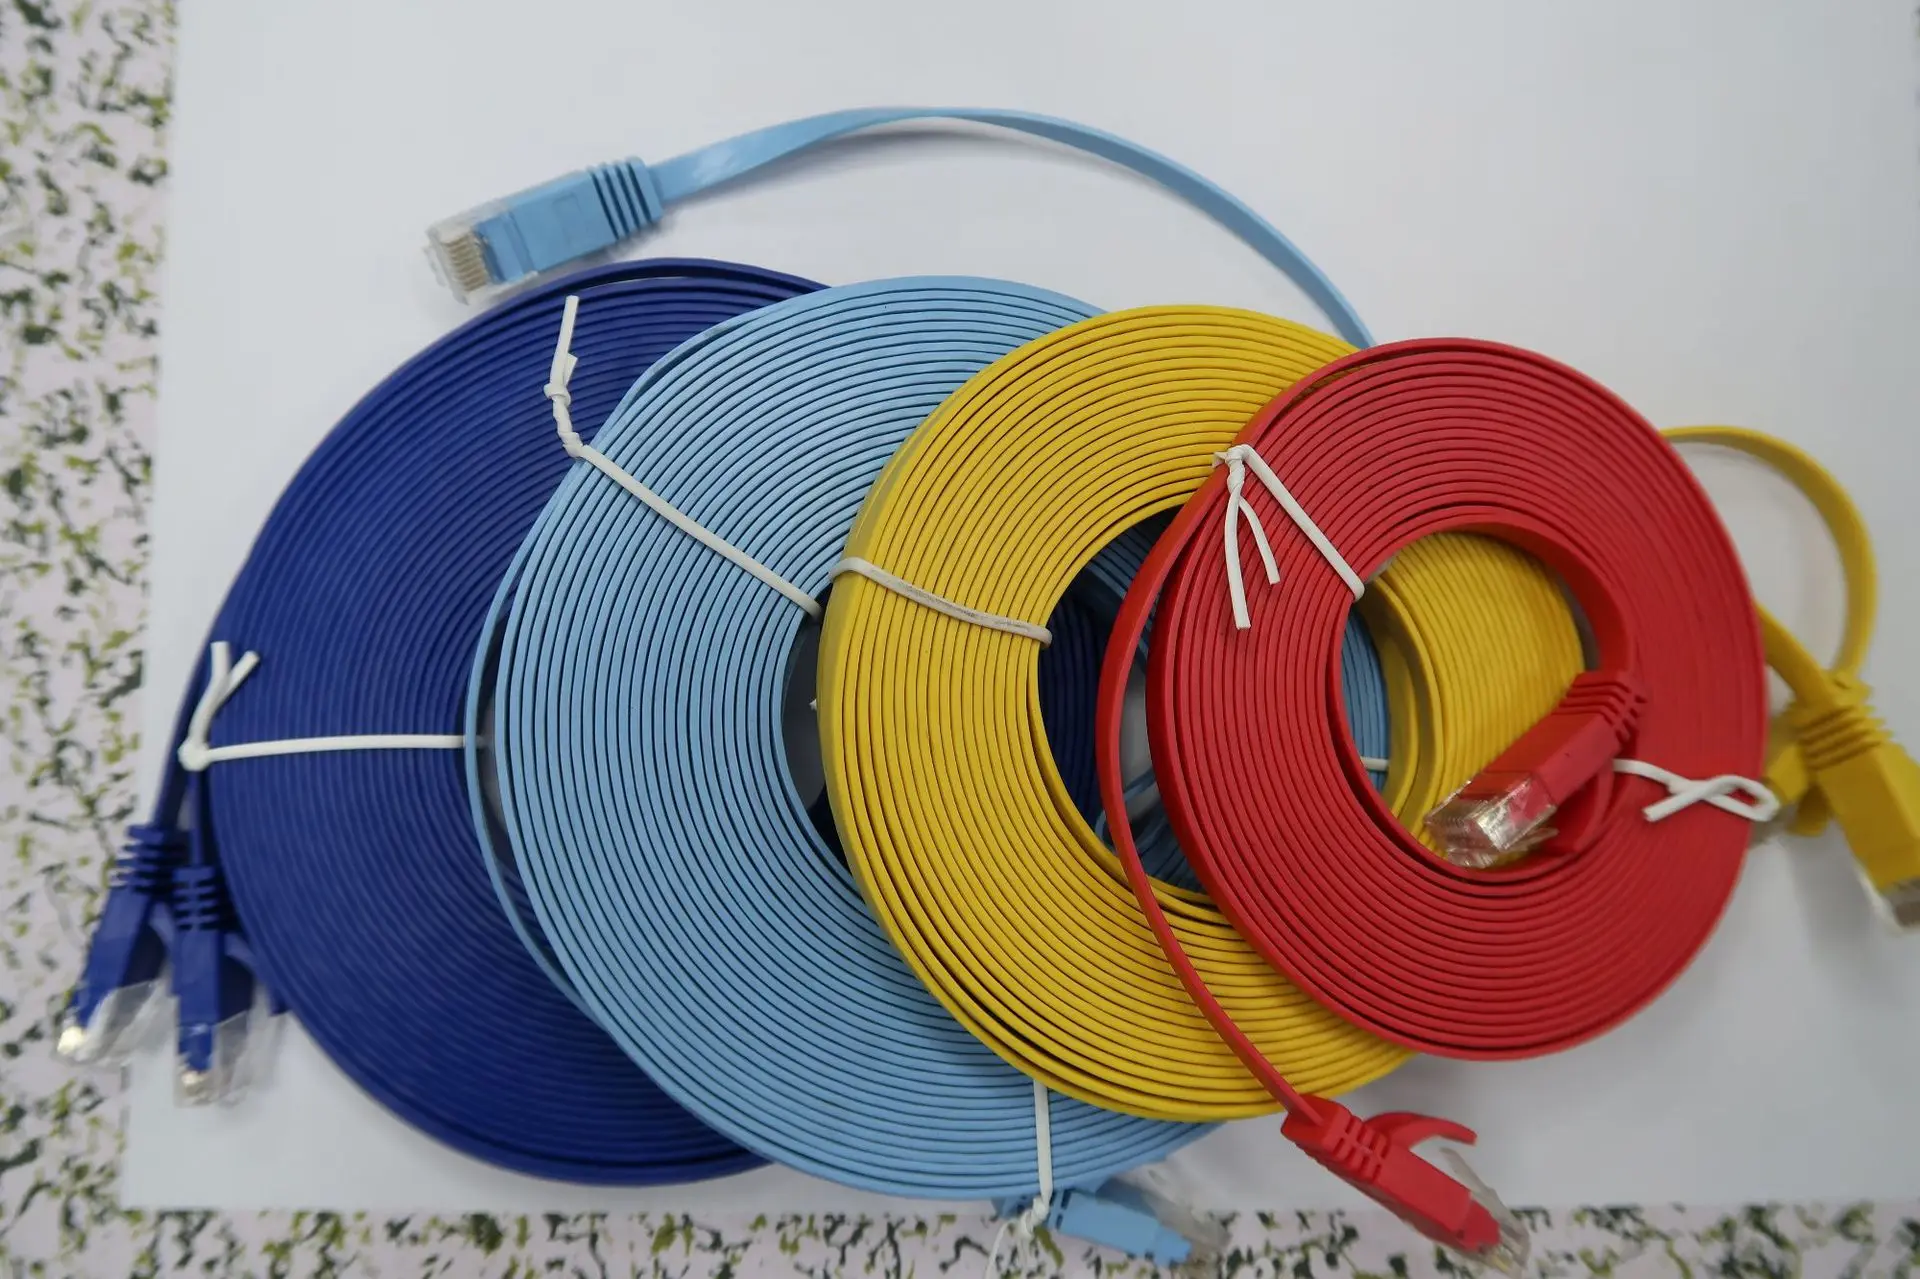 AS06 ROSE 5meters/lot Ribbon Cable 10WAY Flat Color Rainbow Ribbon Cable Wire Rainbow Cable 10P Ribbon Cable 28AWG